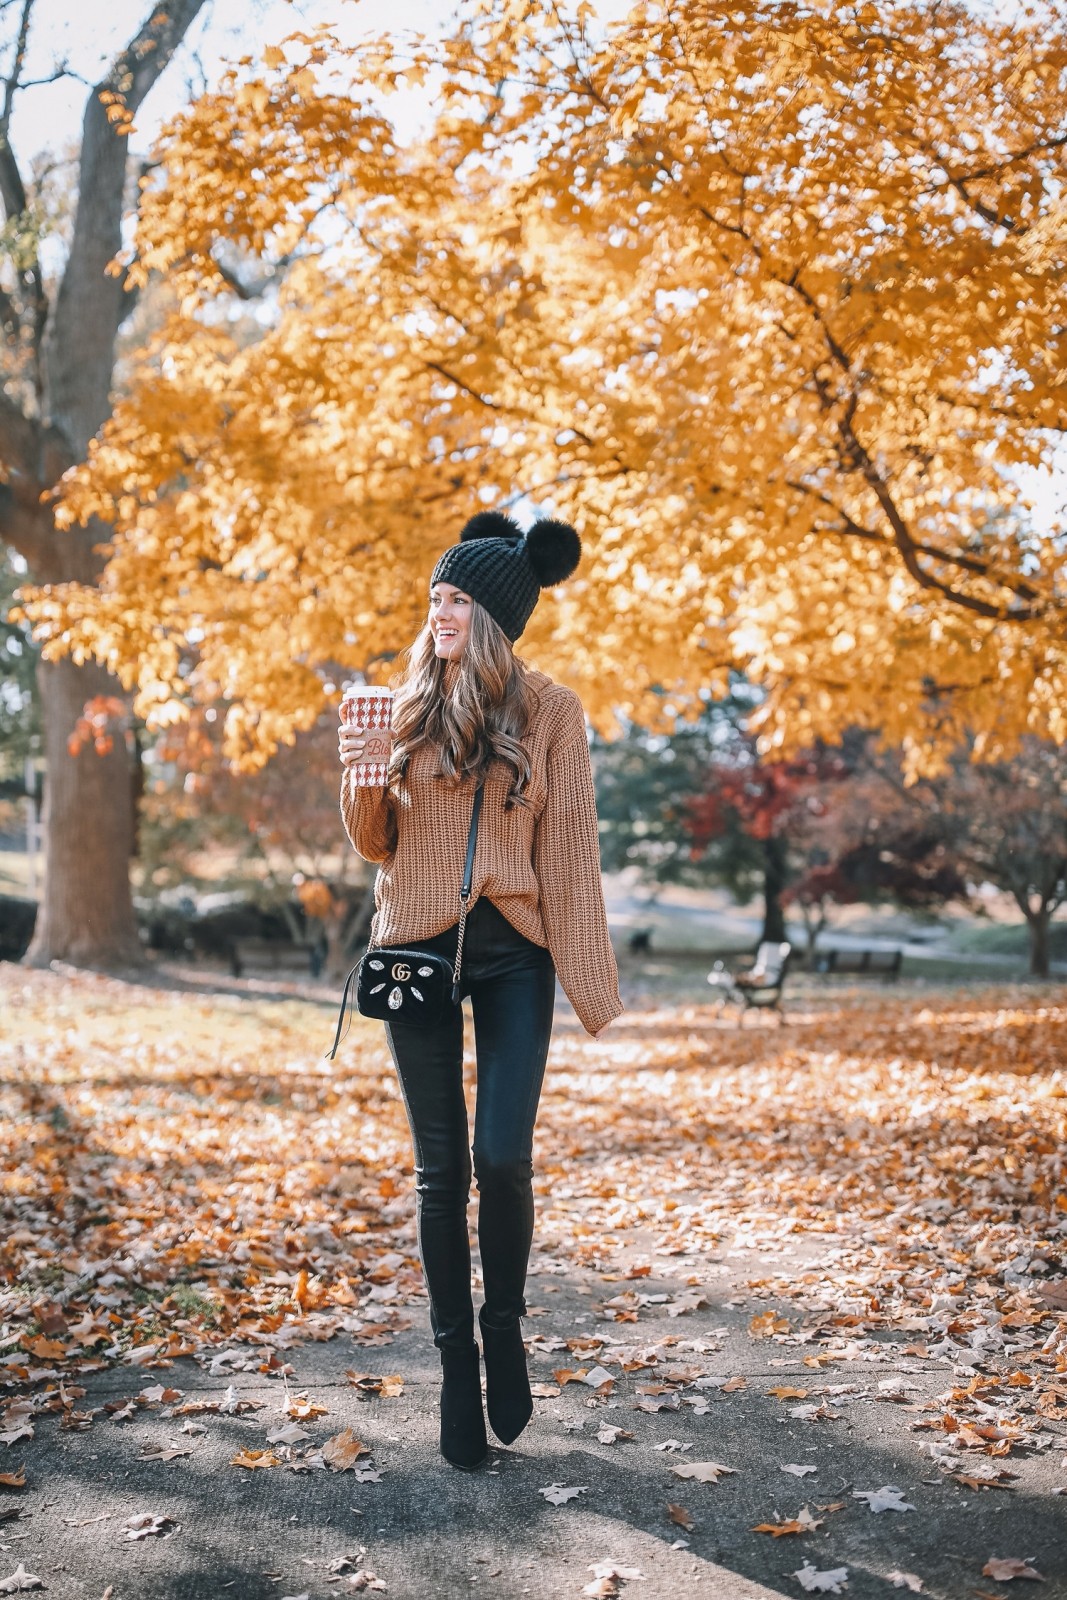 20 Trendy Winter Outfit Ideas To Keep You Warm - 15